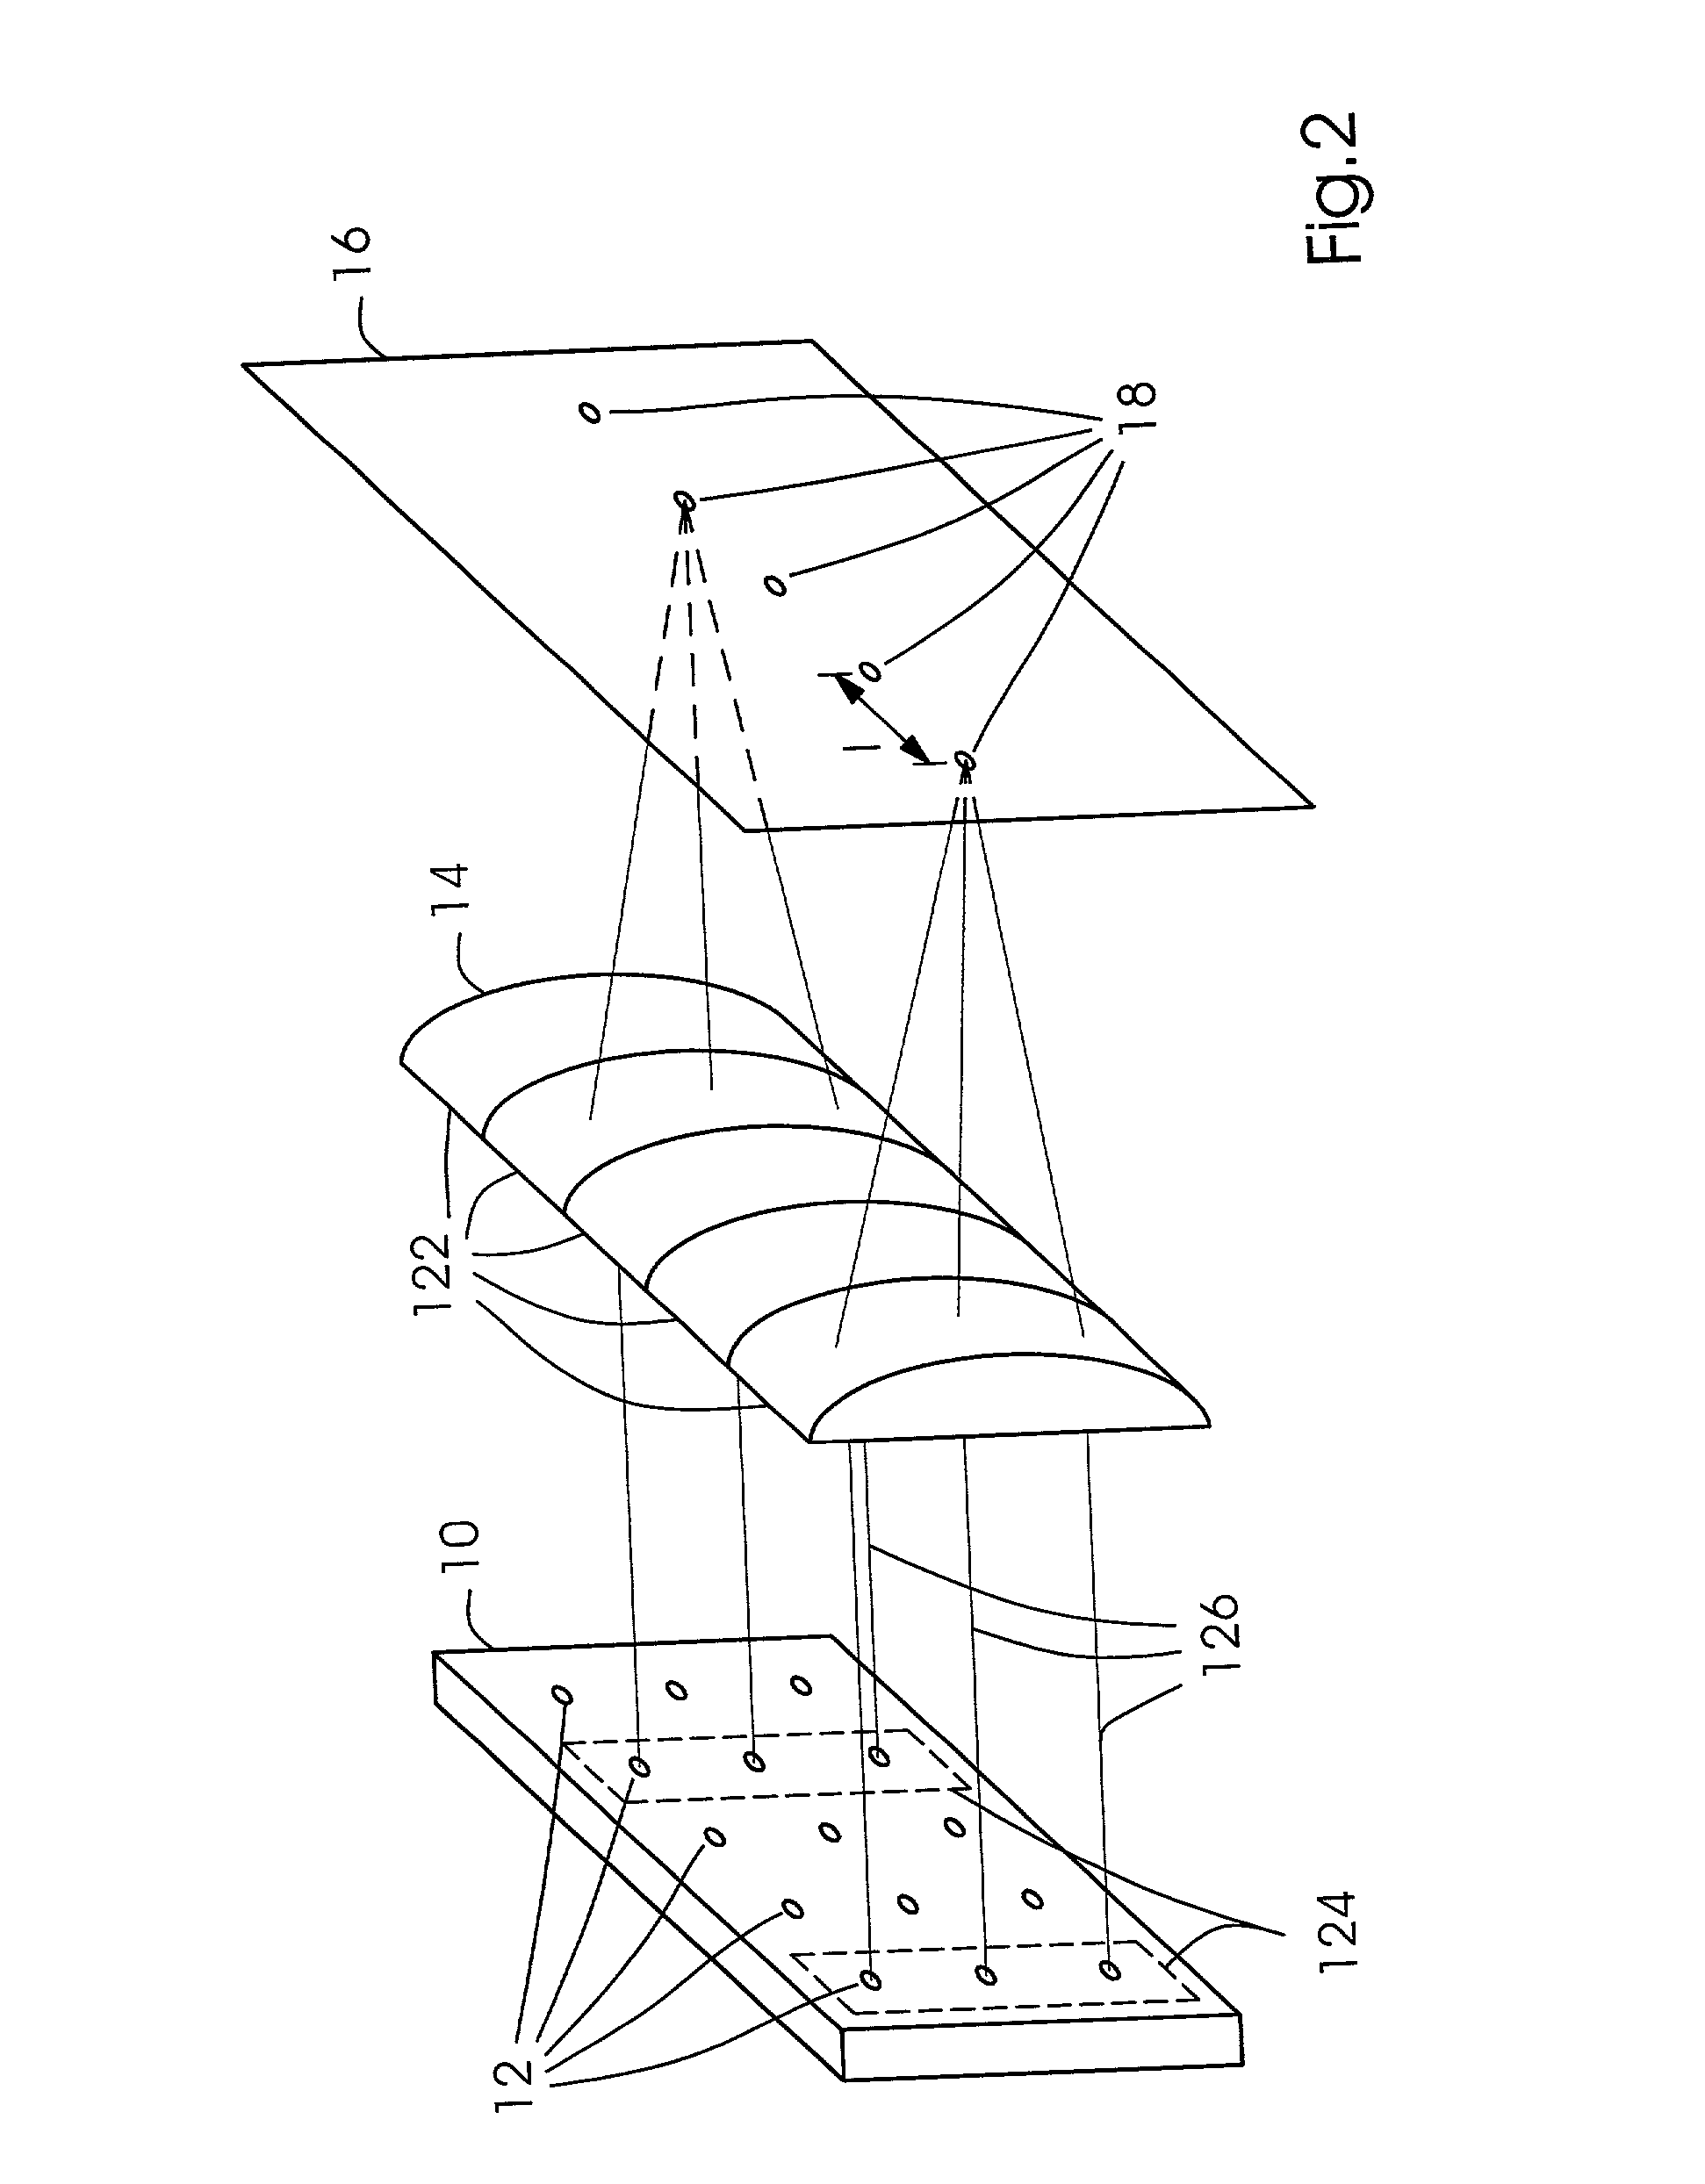 Image-recording device for a printing form, having an array of VCSEL light sources